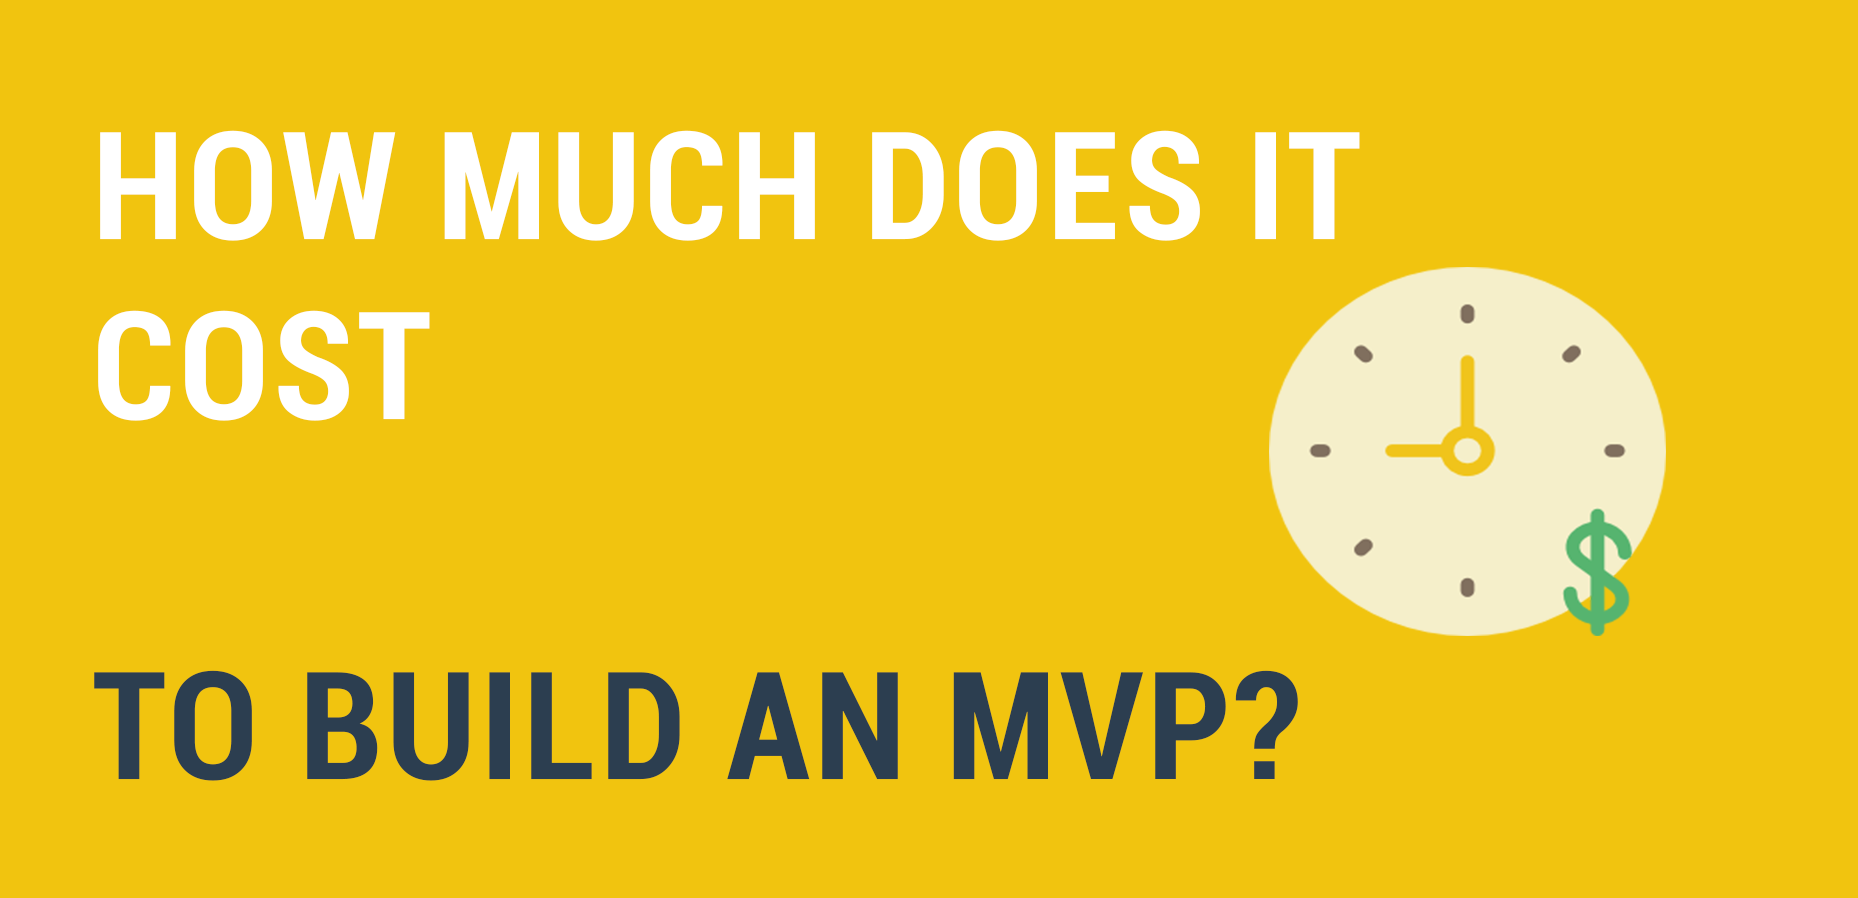 Cost to build an MVP